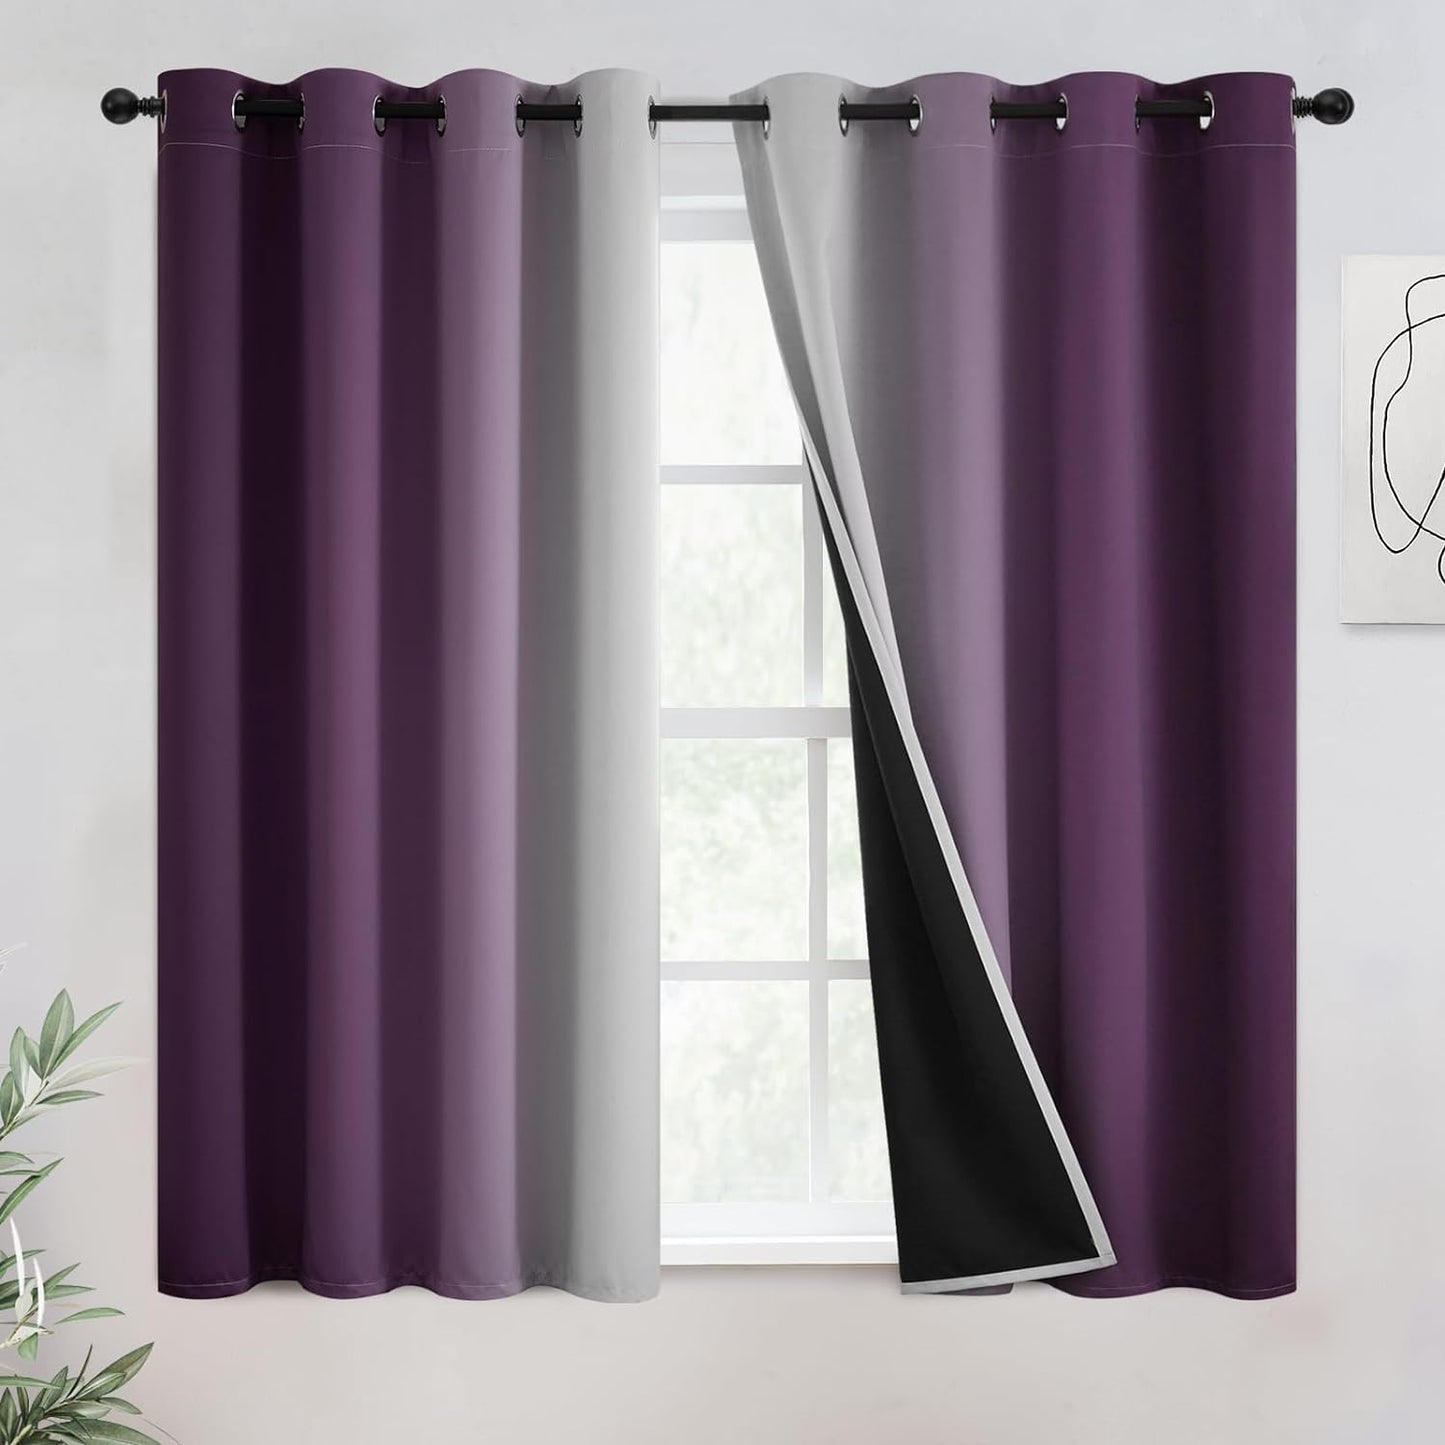 COSVIYA 100% Blackout Curtains & Drapes Ombre Purple Curtains 63 Inch Length 2 Panels,Full Room Darkening Grommet Gradient Insulated Thermal Window Curtains for Bedroom/Living Room,52X63 Inches  COSVIYA Blackout Purple To Grayish White 52W X 54L 